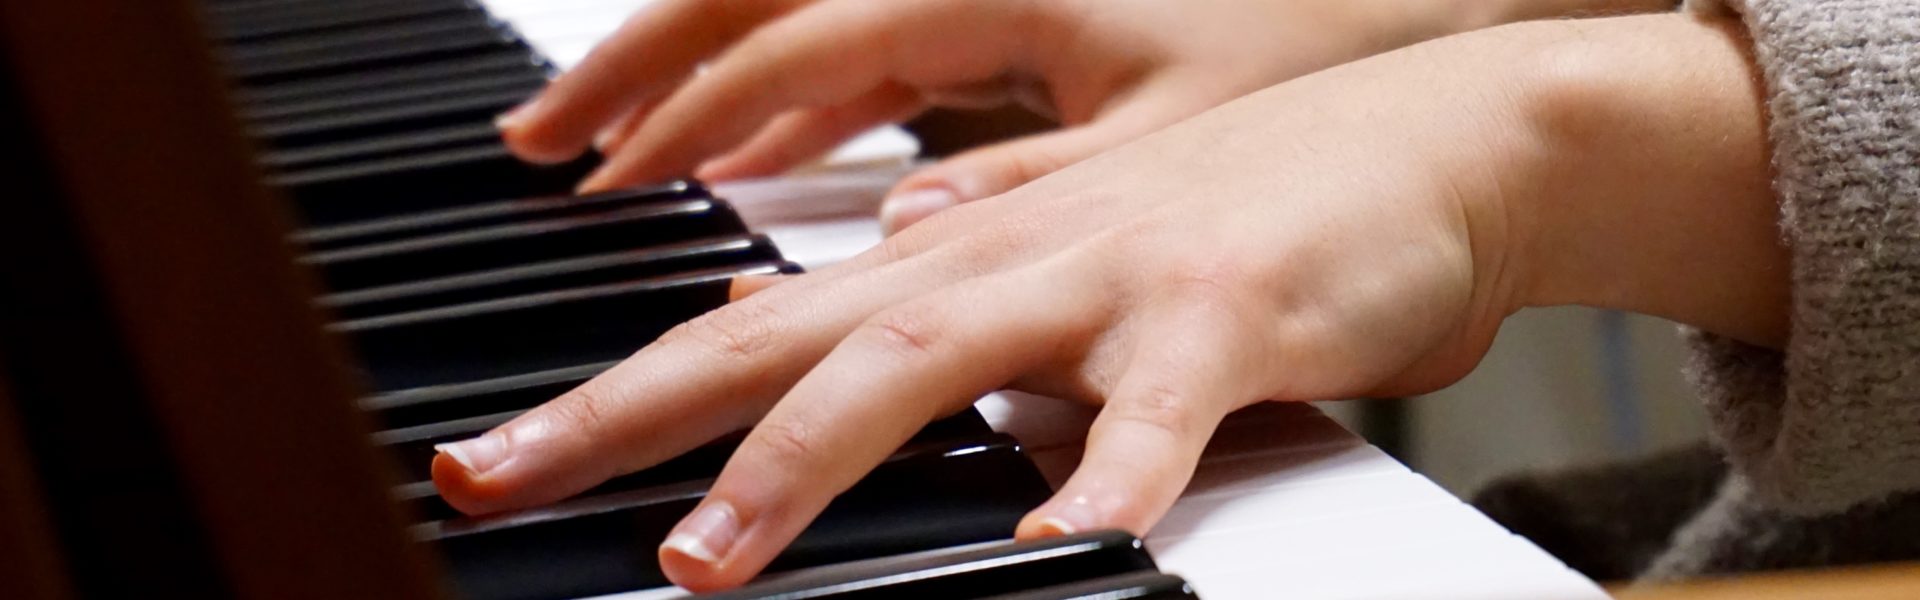 Does your child have a passion for music?